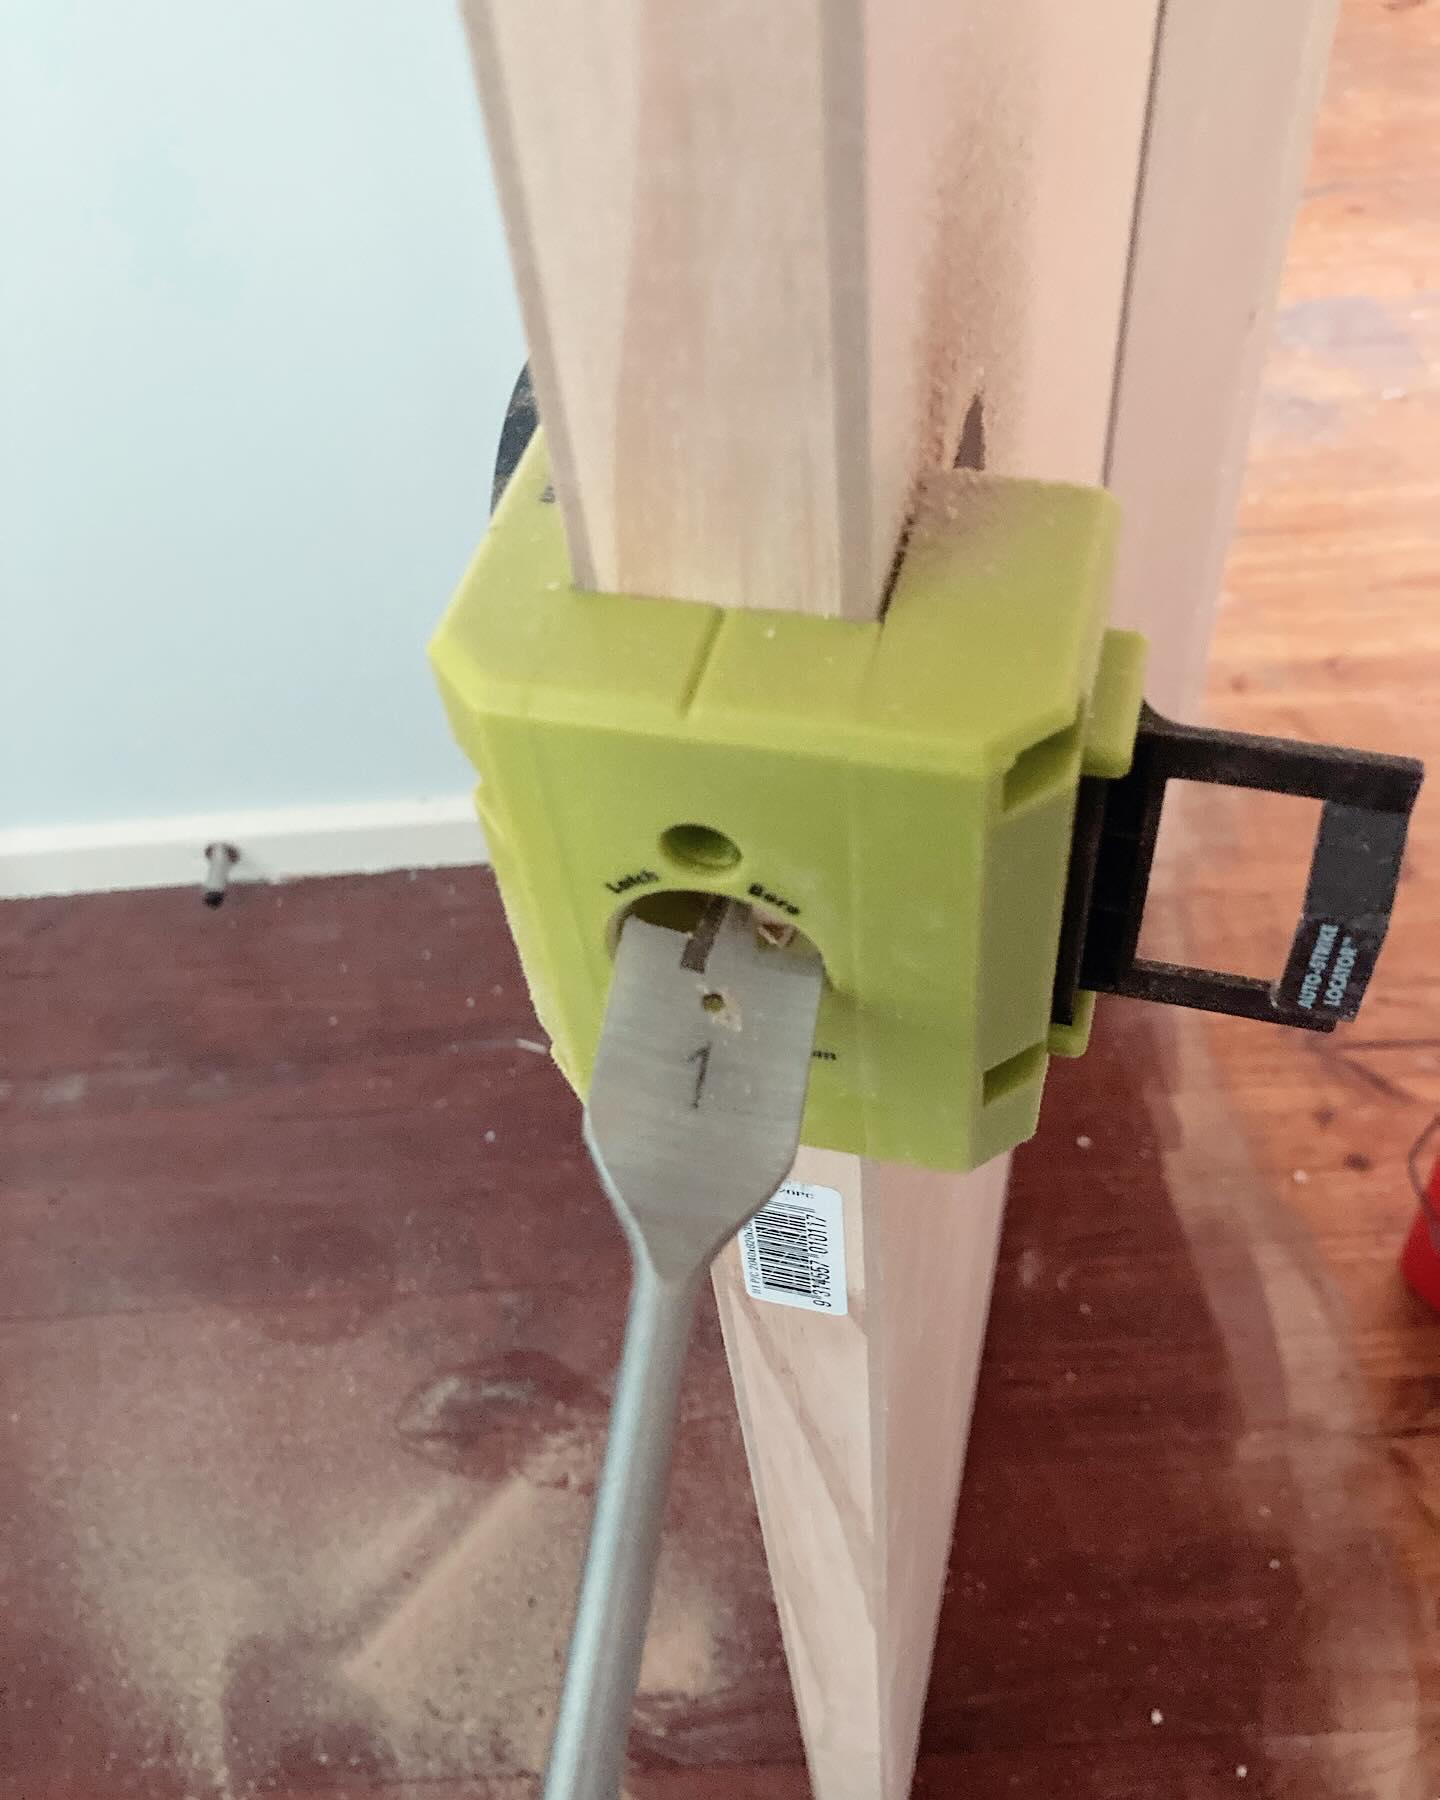 installation of door handles made easy with the ryobiau door jig from Bunnings and my boschtoolsanz  dills. It comes with everything needed to lineup and drill the holes needed for internal doors. #diy #powerhaus #ryobi #boschprofessional